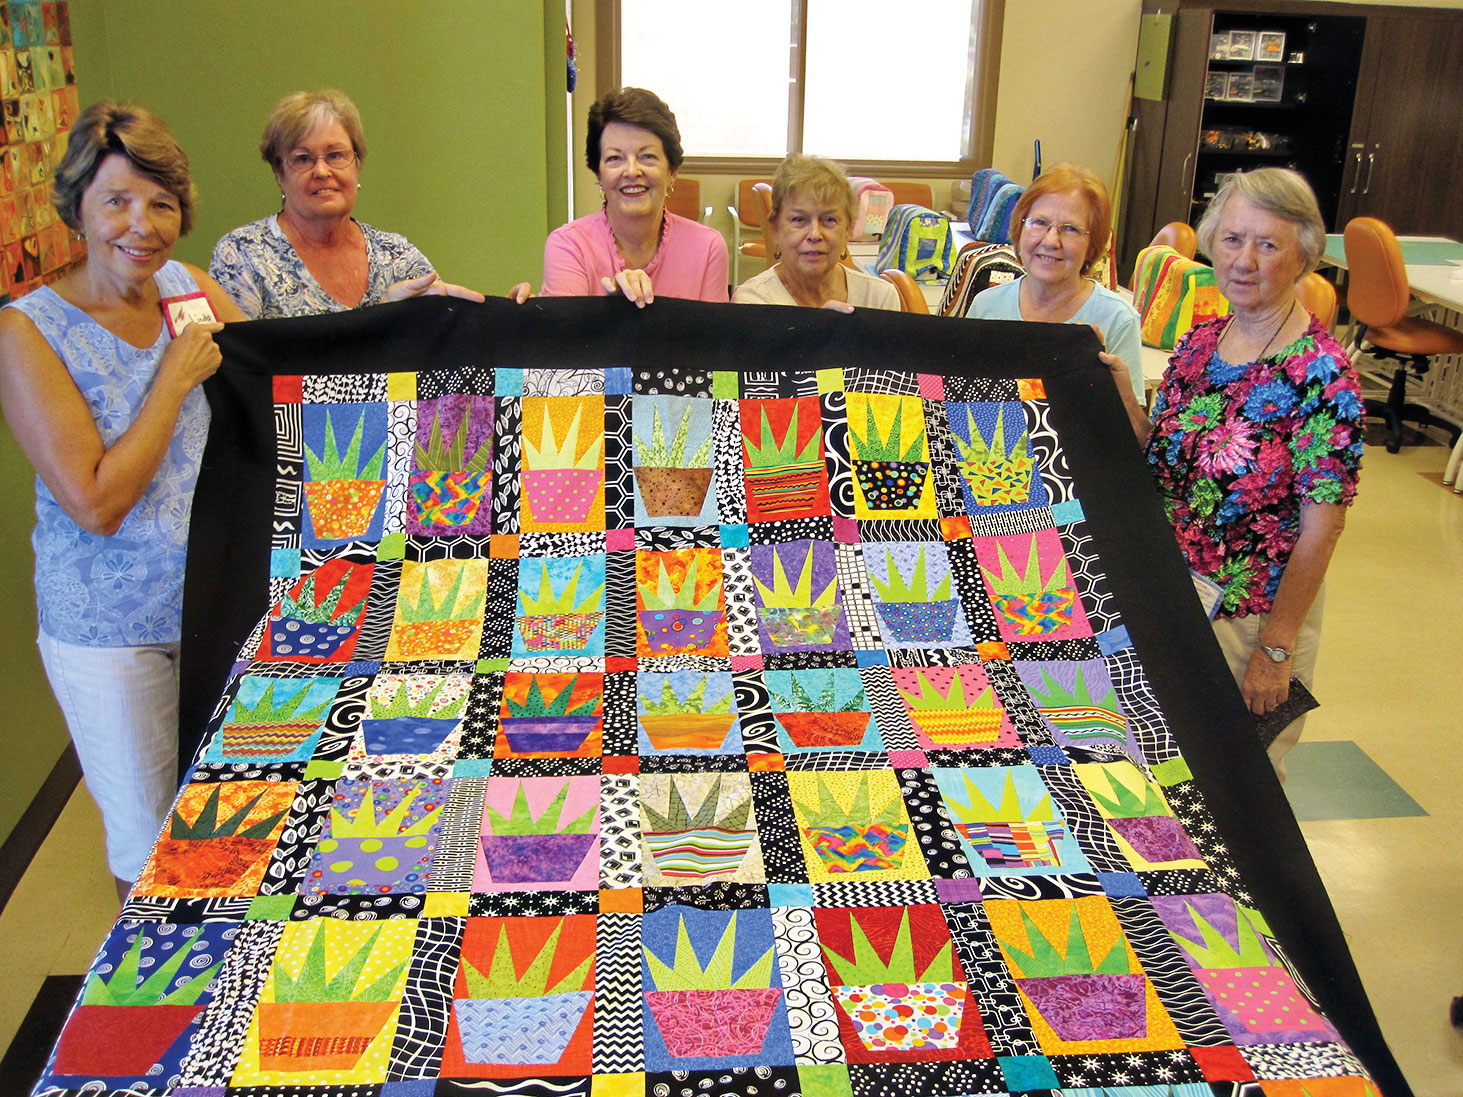 Left to right: Linda Lentz, Marge Swim, Ann Nease, Carol Bisio, Judy Spencer and Marjorie Mitchell. Not pictured, but who worked on the quilt: Pat Neel, Rosie Epler, Jeanne Stevens, Wanda Martin, Kris Wollard, Andrea Drake, Carol Lang, Elizabeth Heintz, Lyn Percy, Sally Trent, Deb Migdalski, Kay Robinson and Linda Surmacewicz.